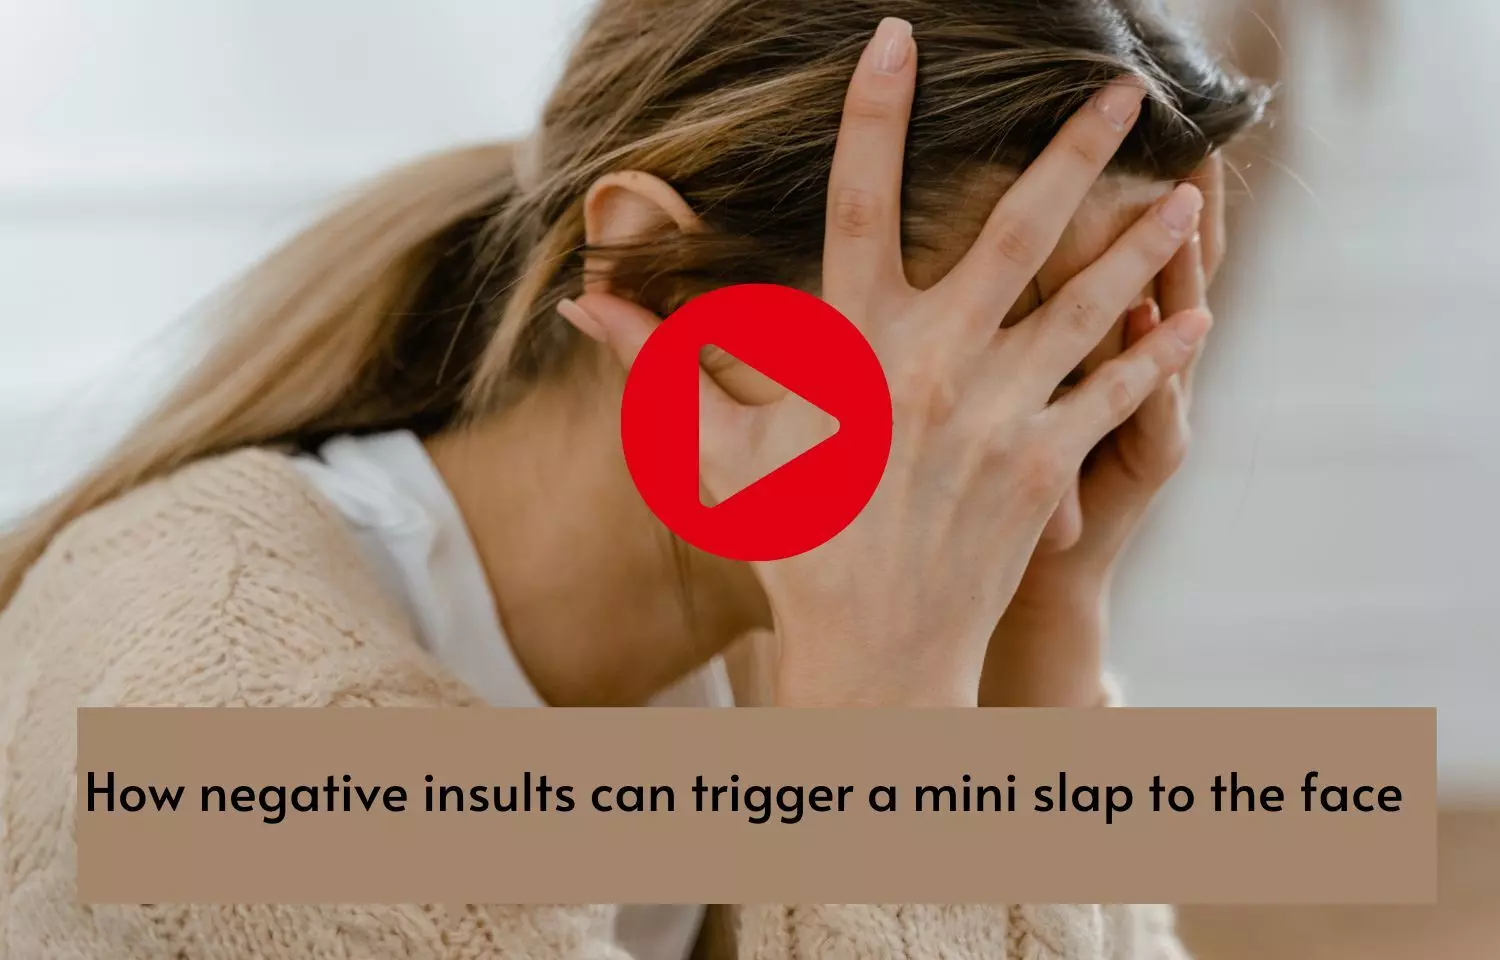 How negative insults can trigger a mini slap to the face